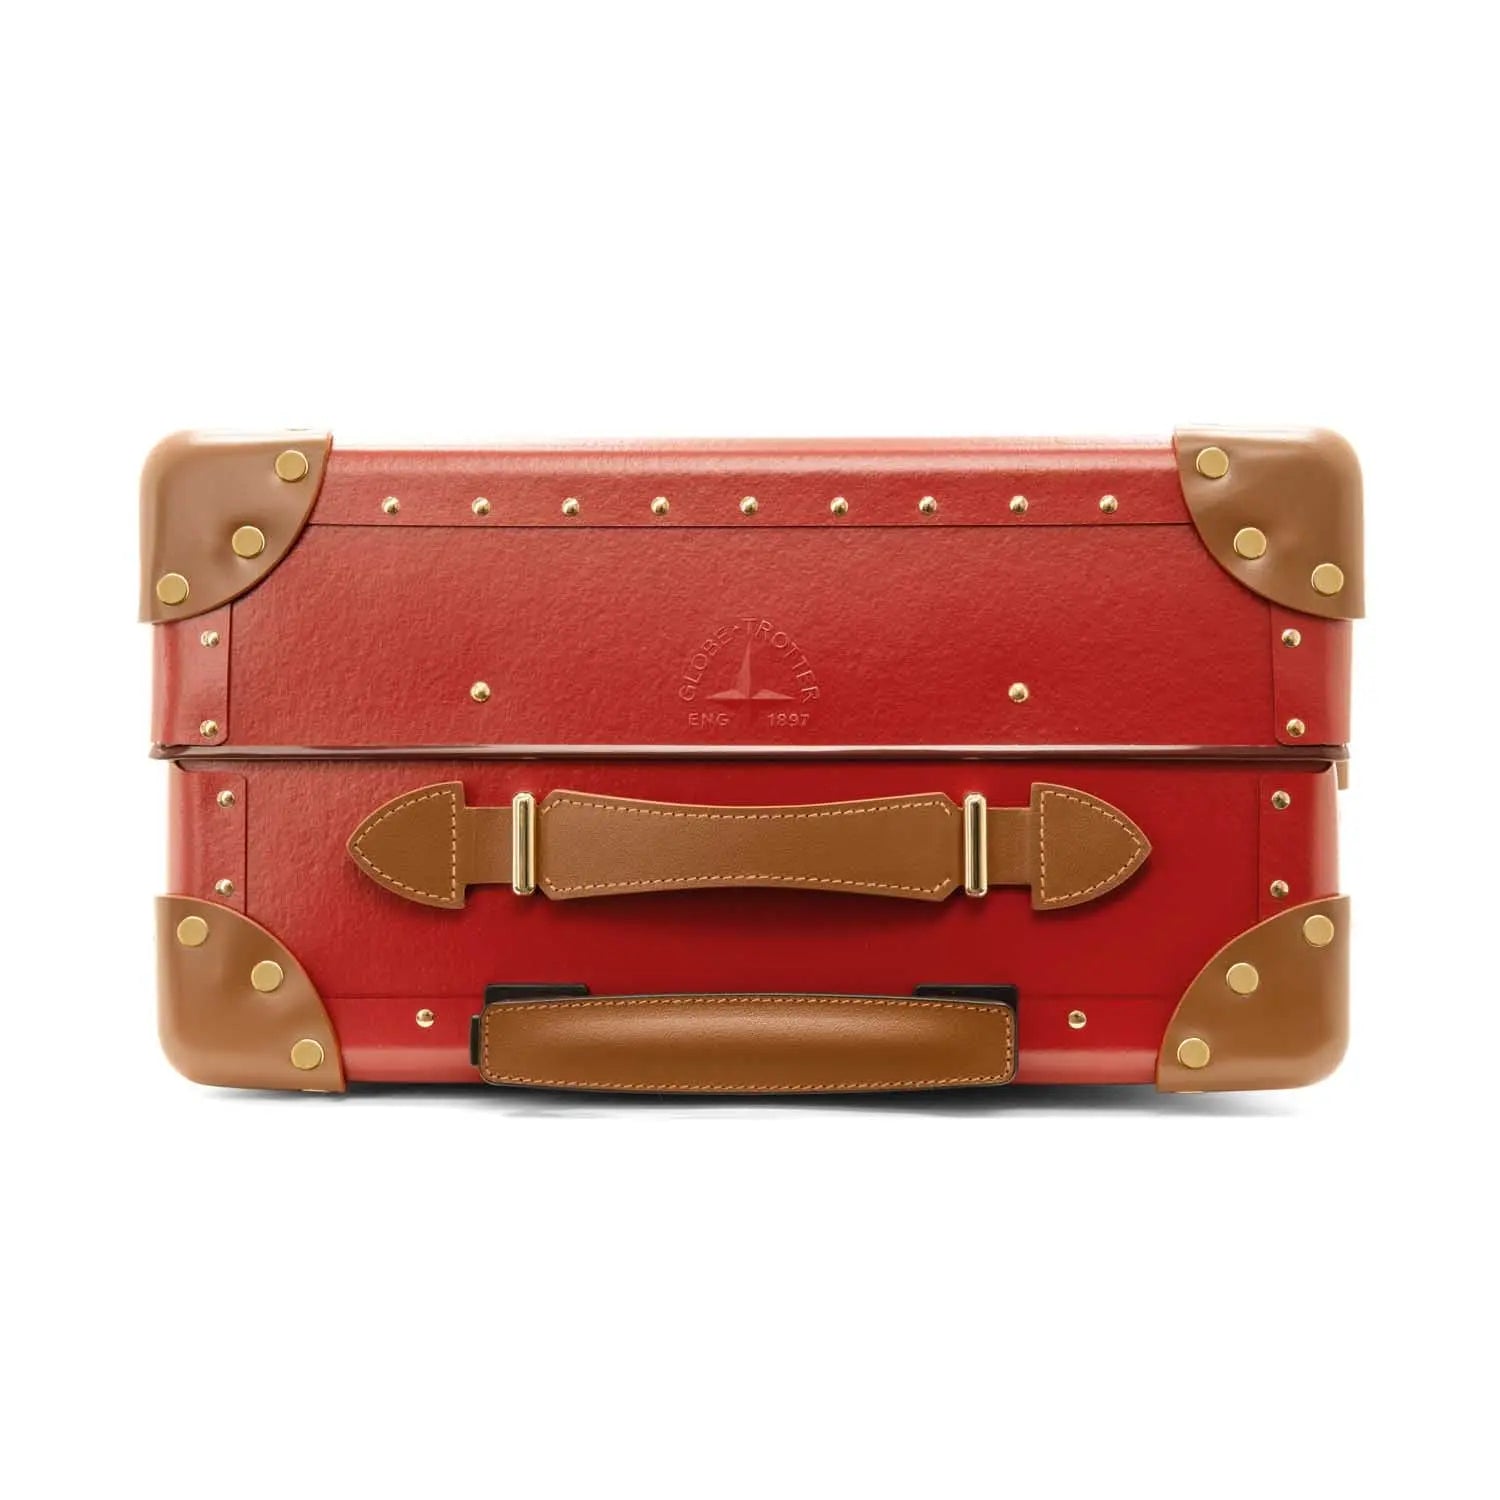 Centenary · Carry-On - 4 Wheels | Red/Caramel/Gold - GLOBE-TROTTER